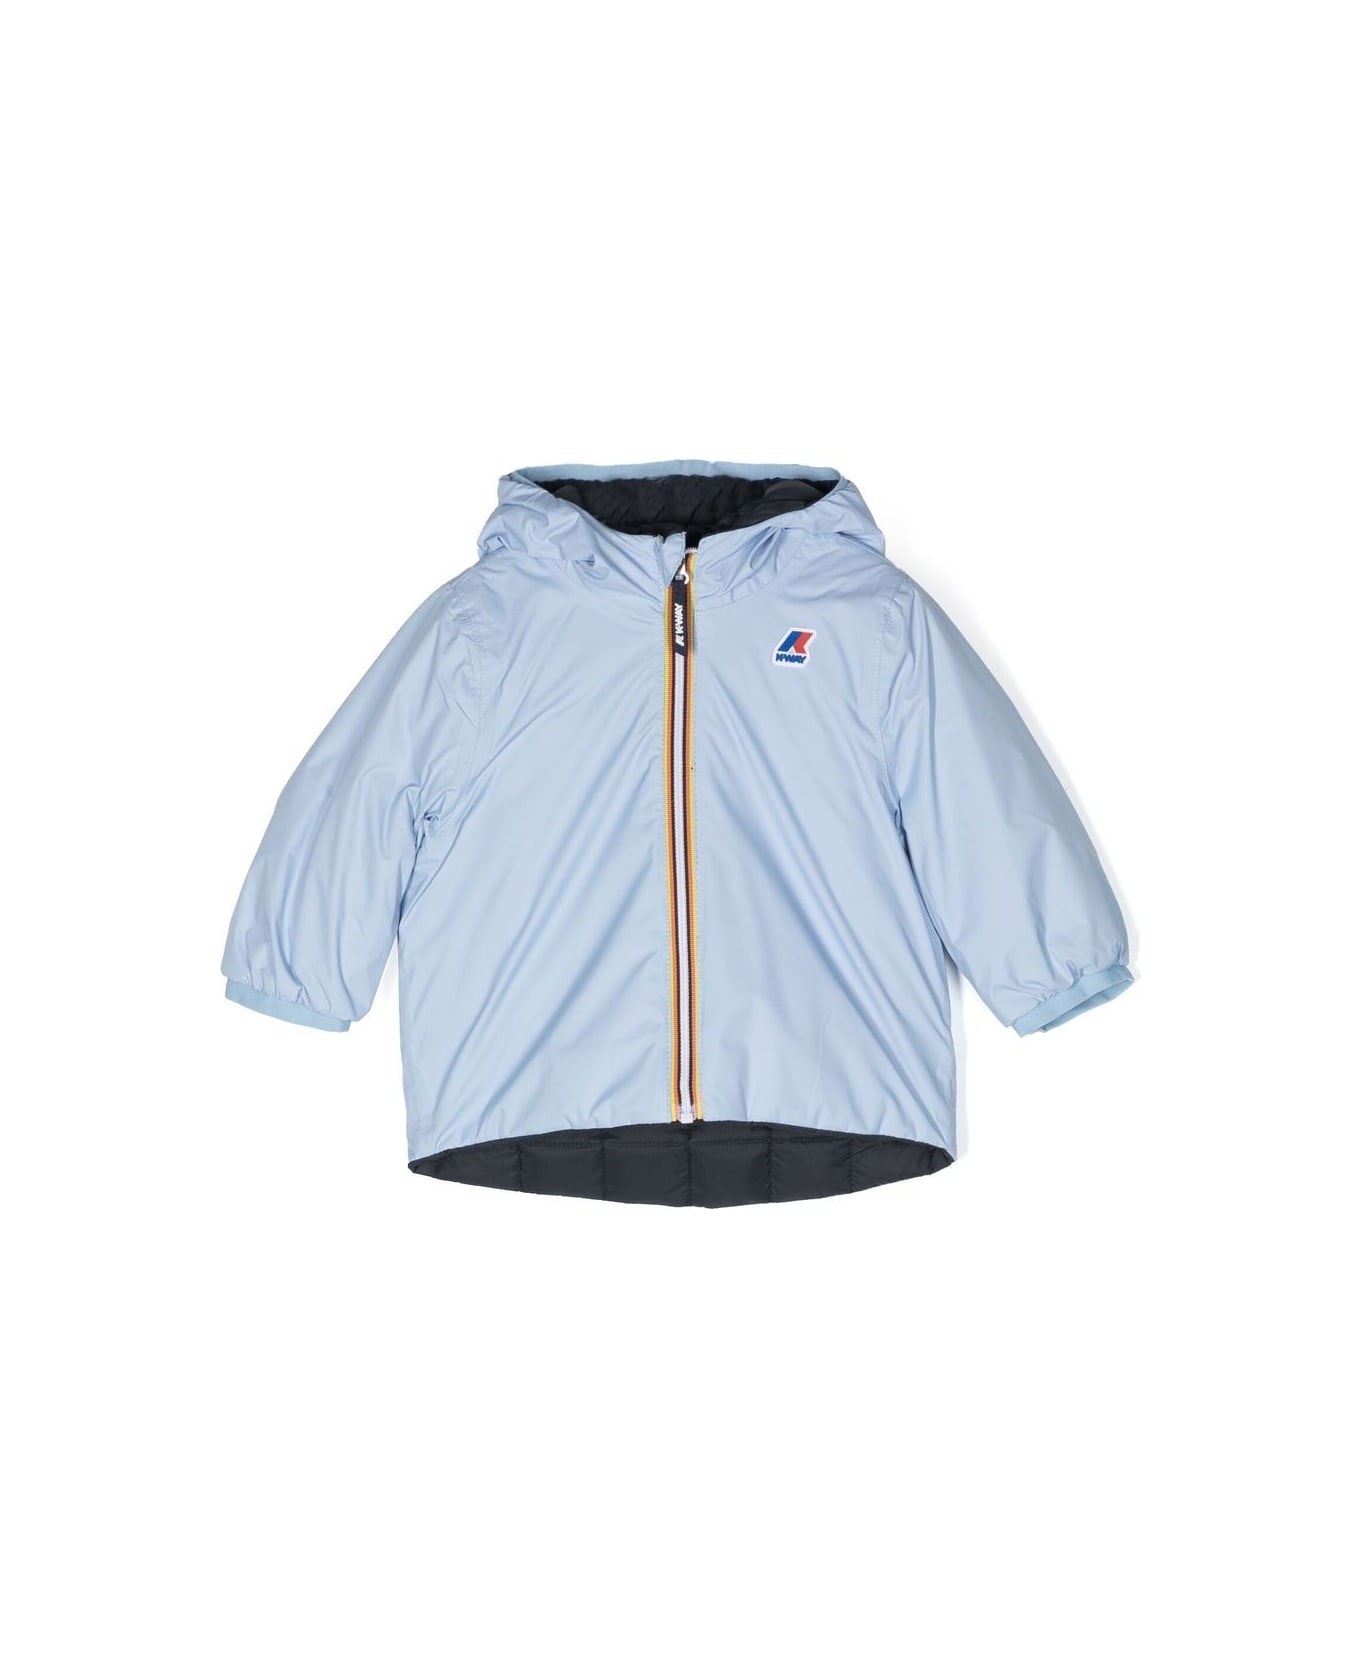 K-Way Down Jacket With Reversible Logo - Light blue